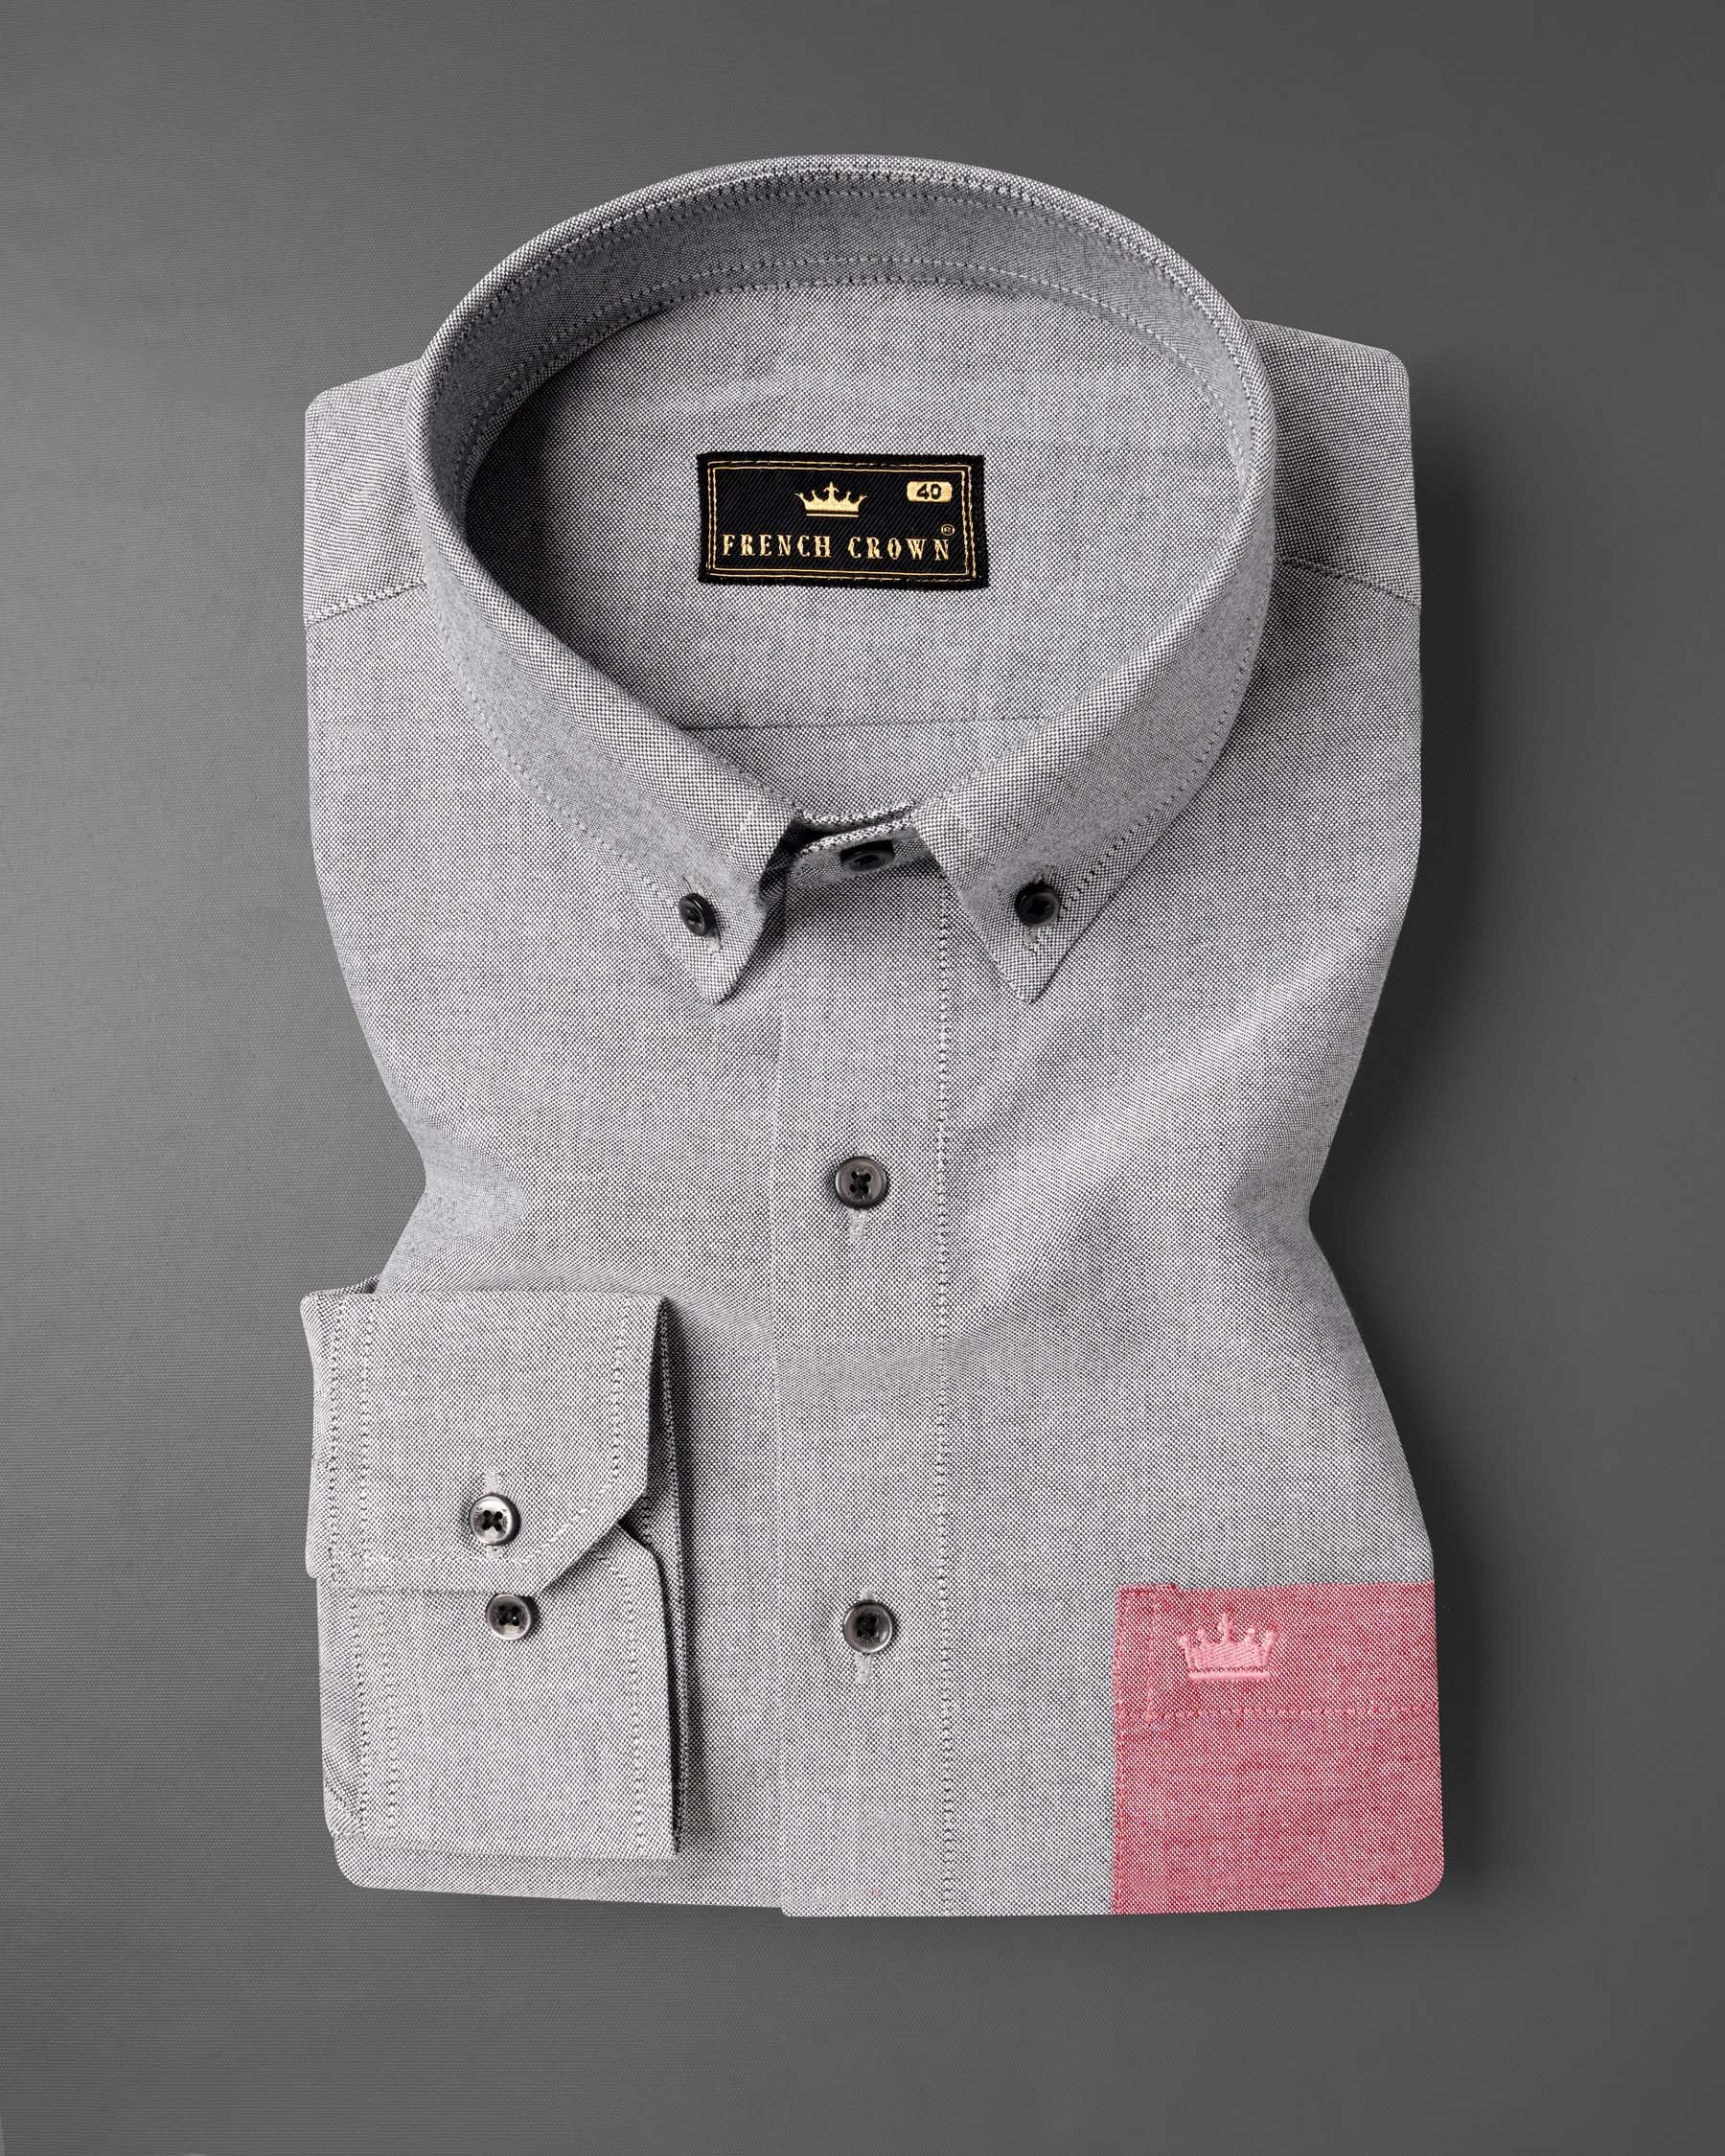 Pumice Gray with Pink Pocket Royal Oxford Shirt 6722-BD-BLK-38,6722-BD-BLK-38,6722-BD-BLK-39,6722-BD-BLK-39,6722-BD-BLK-40,6722-BD-BLK-40,6722-BD-BLK-42,6722-BD-BLK-42,6722-BD-BLK-44,6722-BD-BLK-44,6722-BD-BLK-46,6722-BD-BLK-46,6722-BD-BLK-48,6722-BD-BLK-48,6722-BD-BLK-50,6722-BD-BLK-50,6722-BD-BLK-52,6722-BD-BLK-52